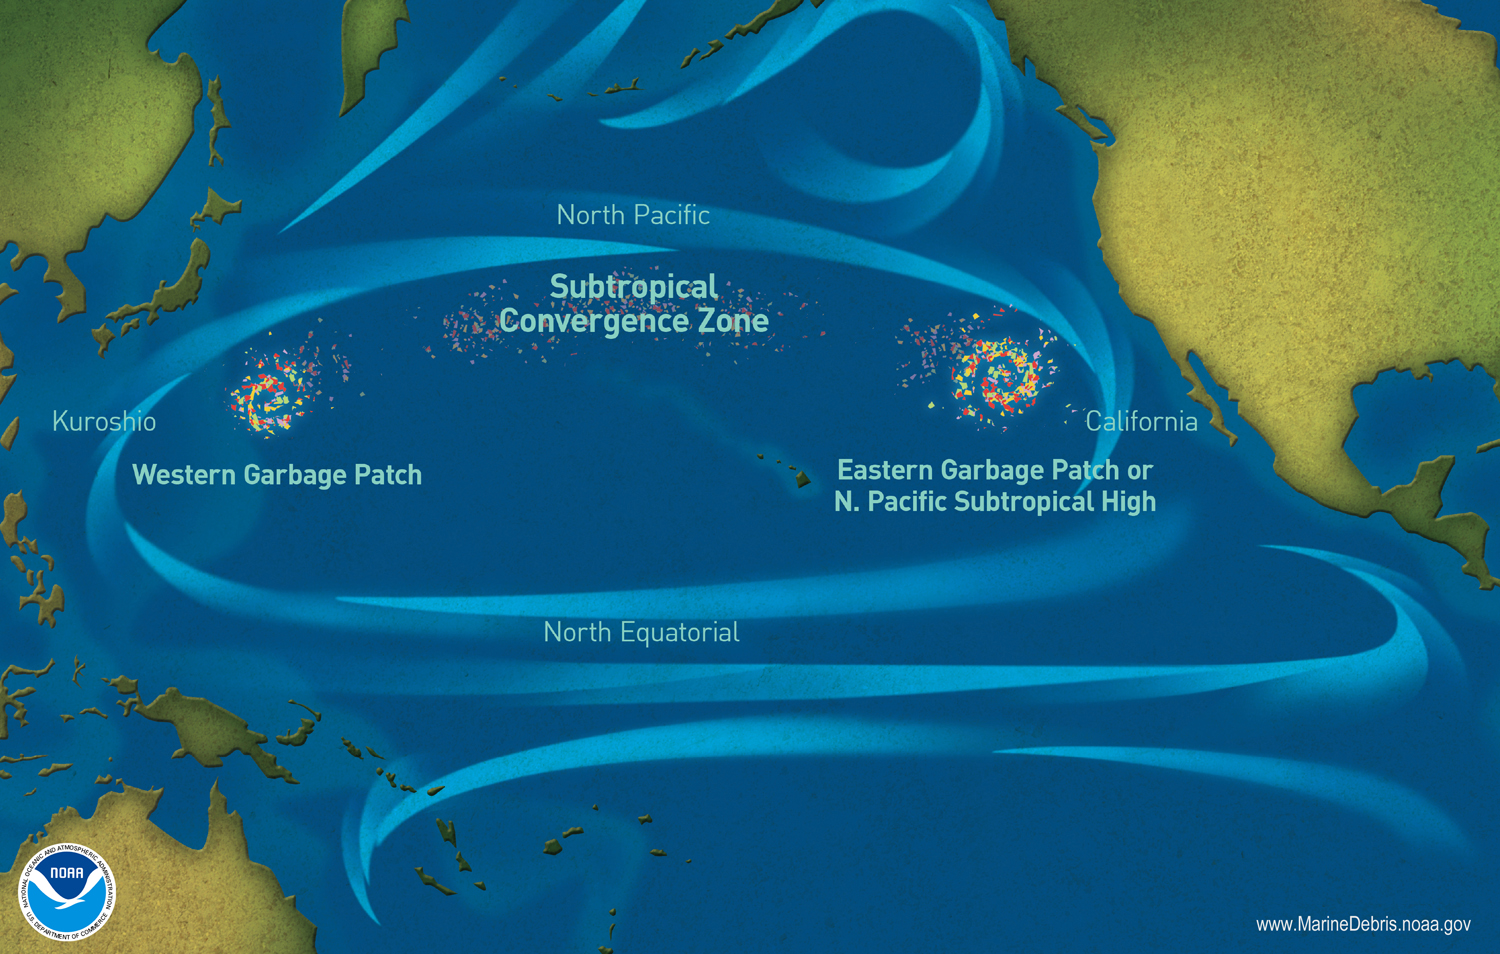 north pacific ocean map with islands